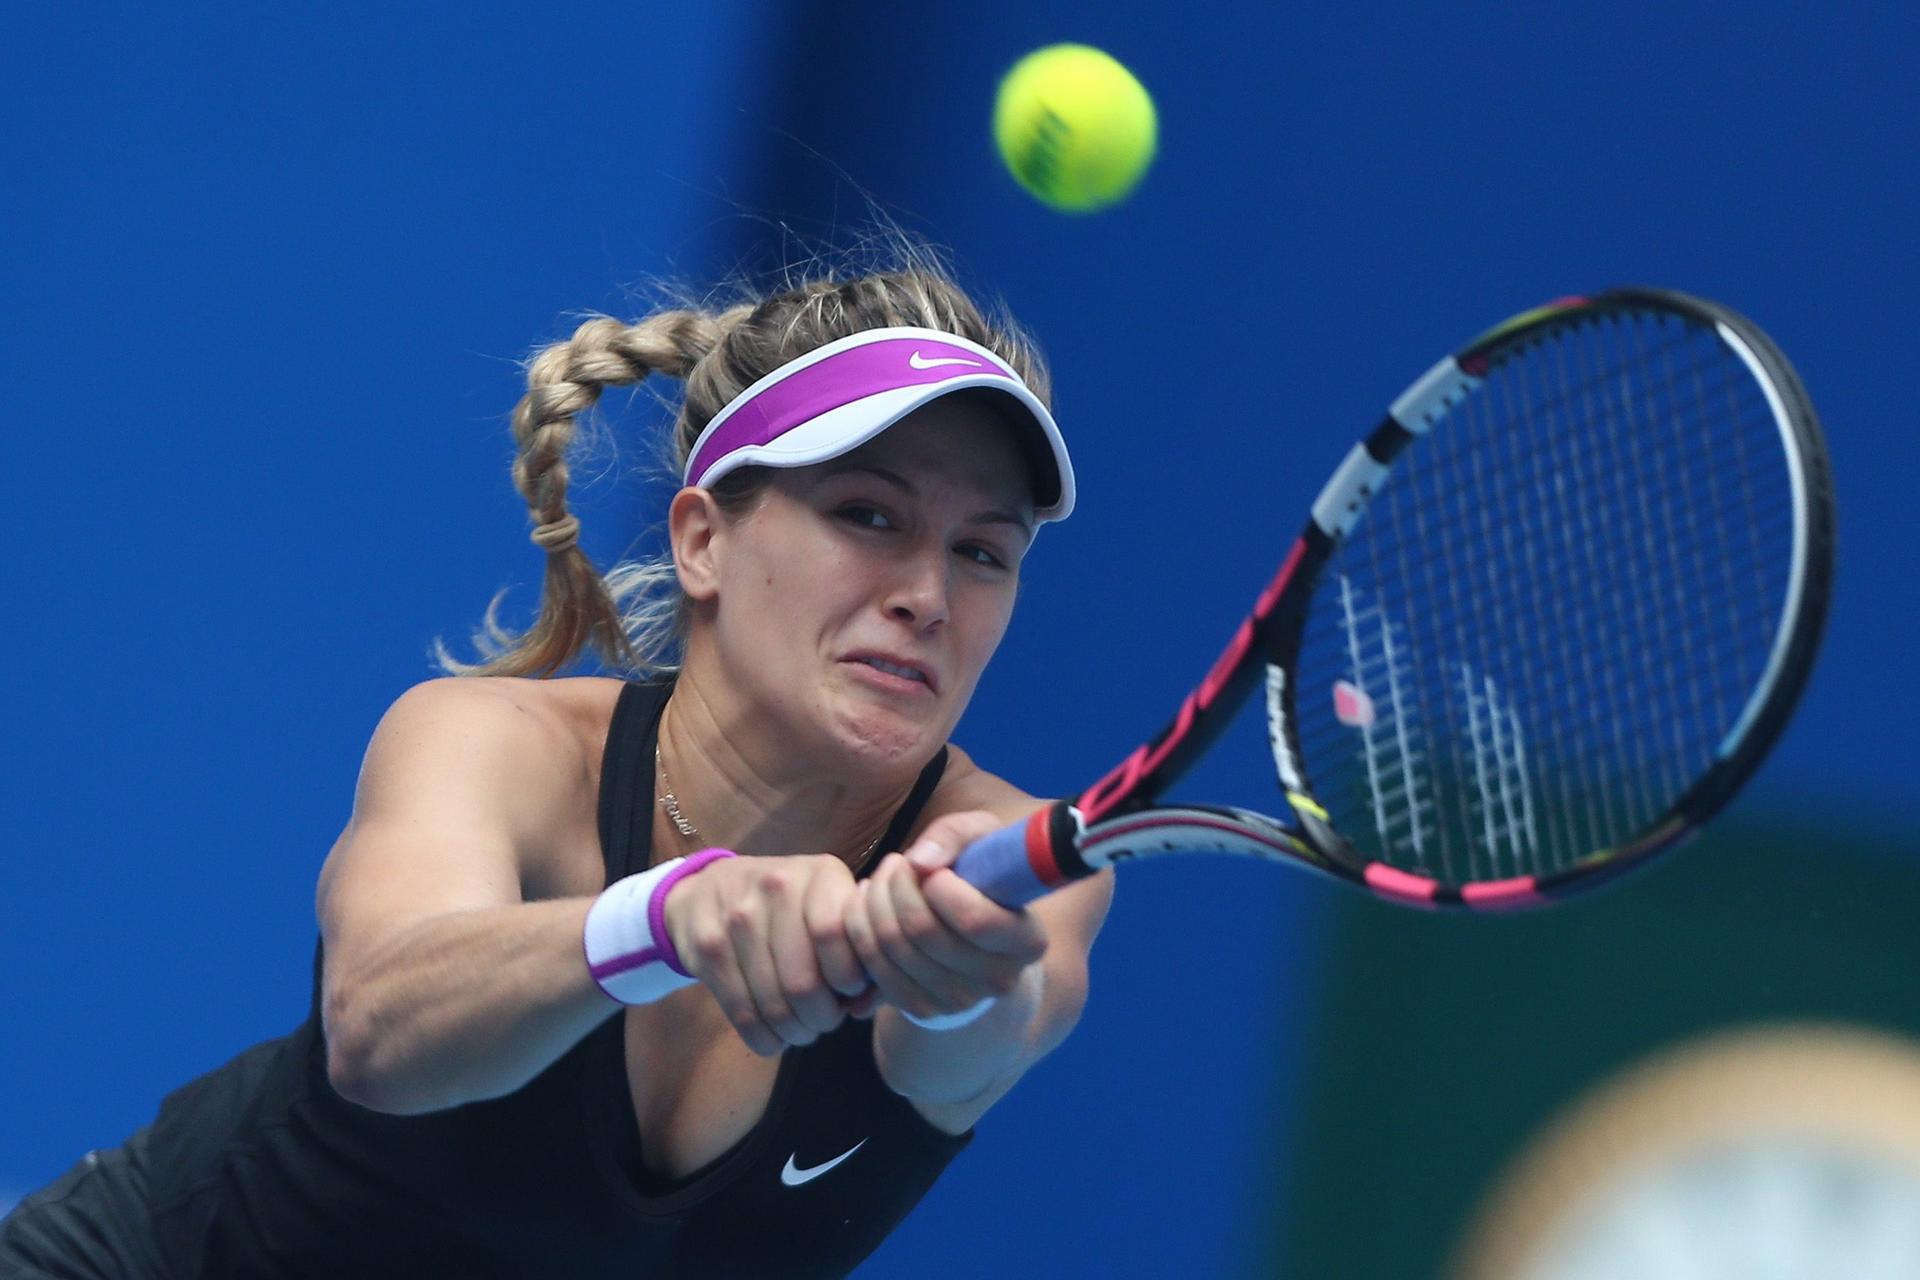 Eugenie Bouchard makes a return before retiring from her game against Andrea Petkovic at the China Open. Photo: EPA